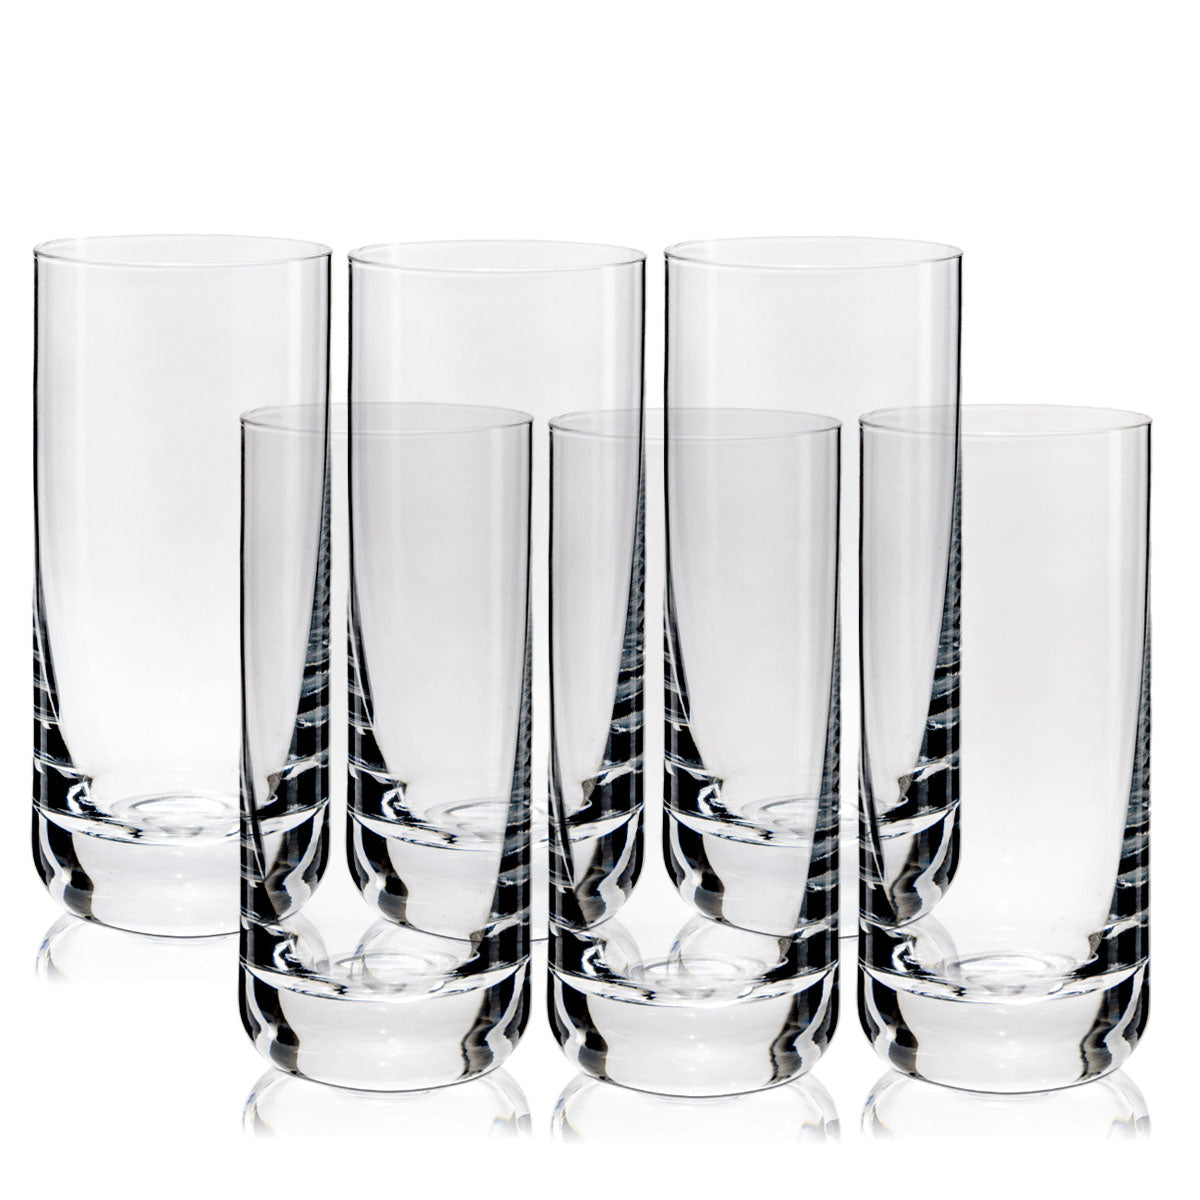 Sz Beer Tumbler Convention 42 Set of 6